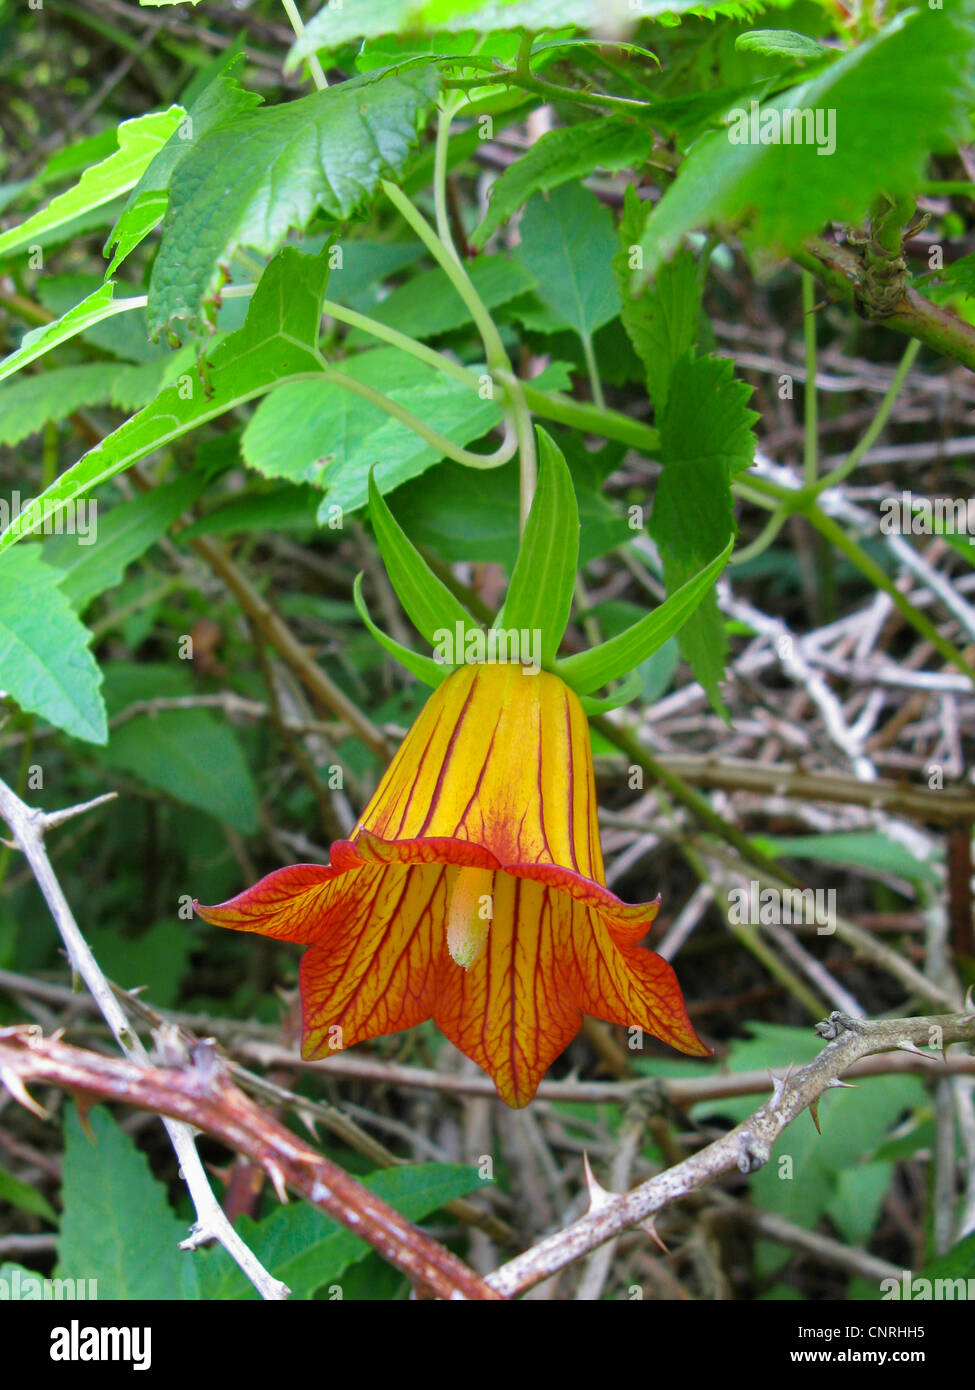 Canary bellflower (Canarina canariensis), flower, national flower of the Canary Islands, Canary Islands, Tenerife Stock Photo